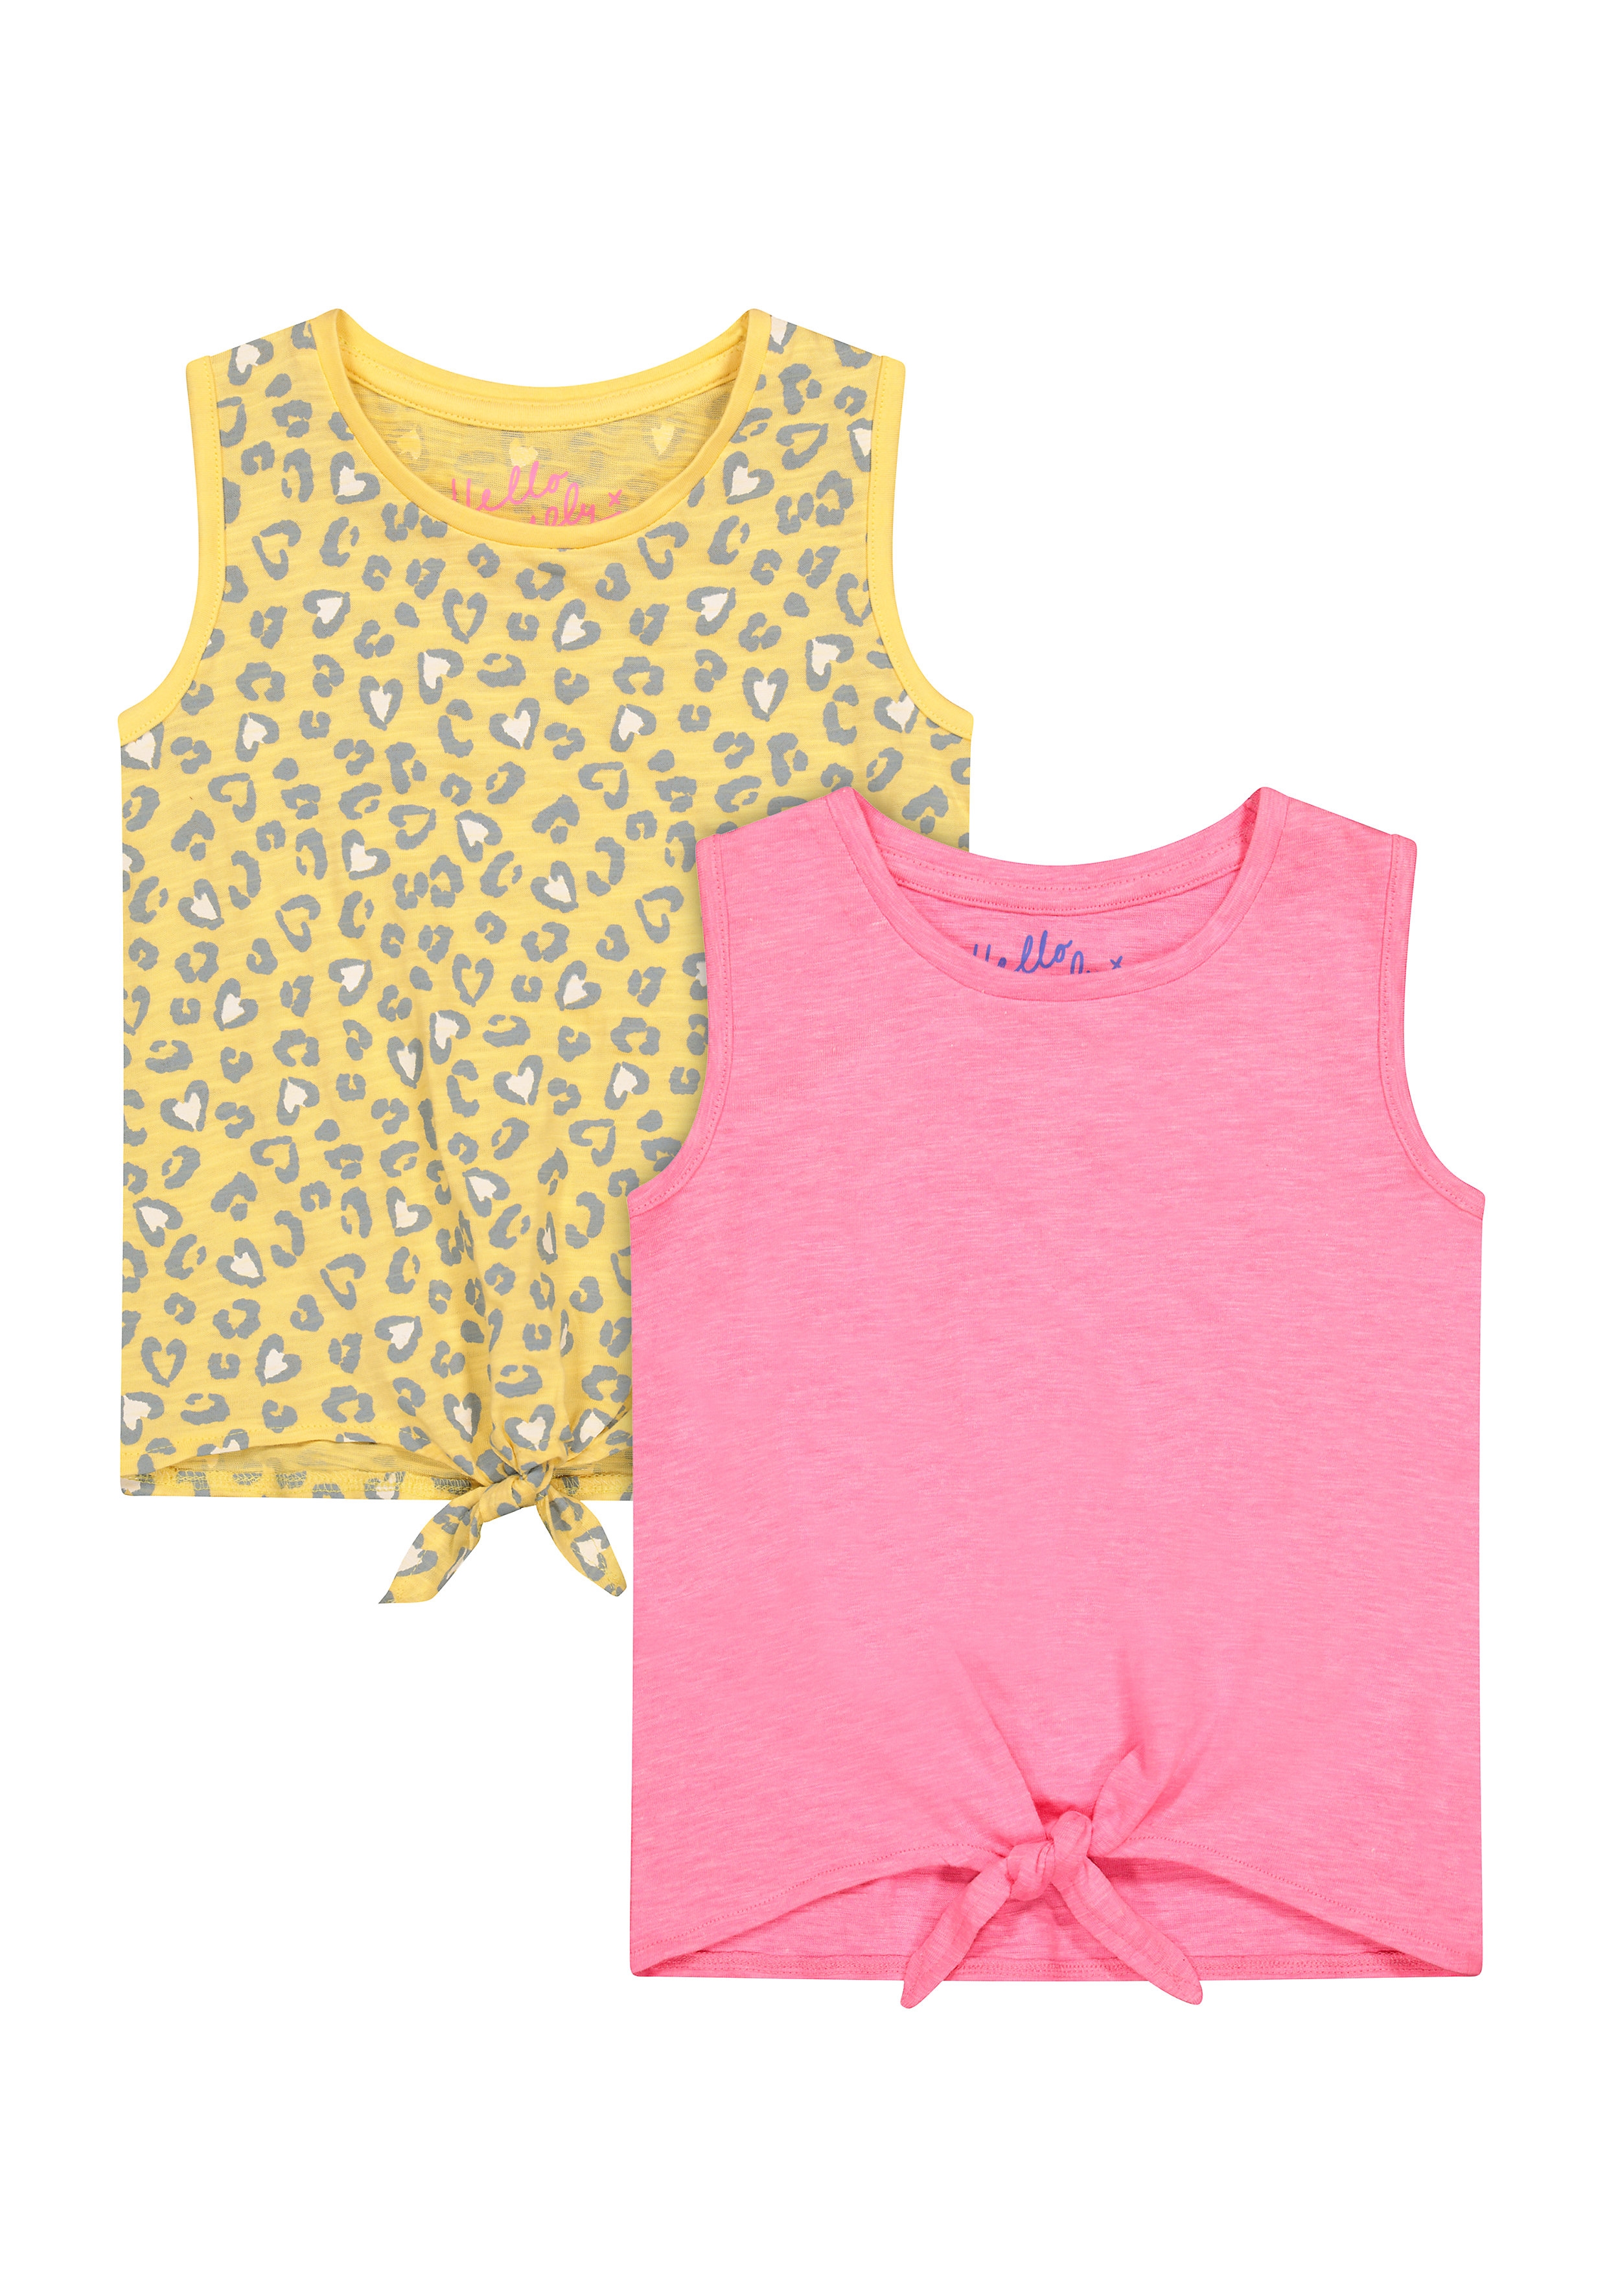 Girls Sleeveless Round Neck T-shirts  - Pack Of 2 - Multicolor